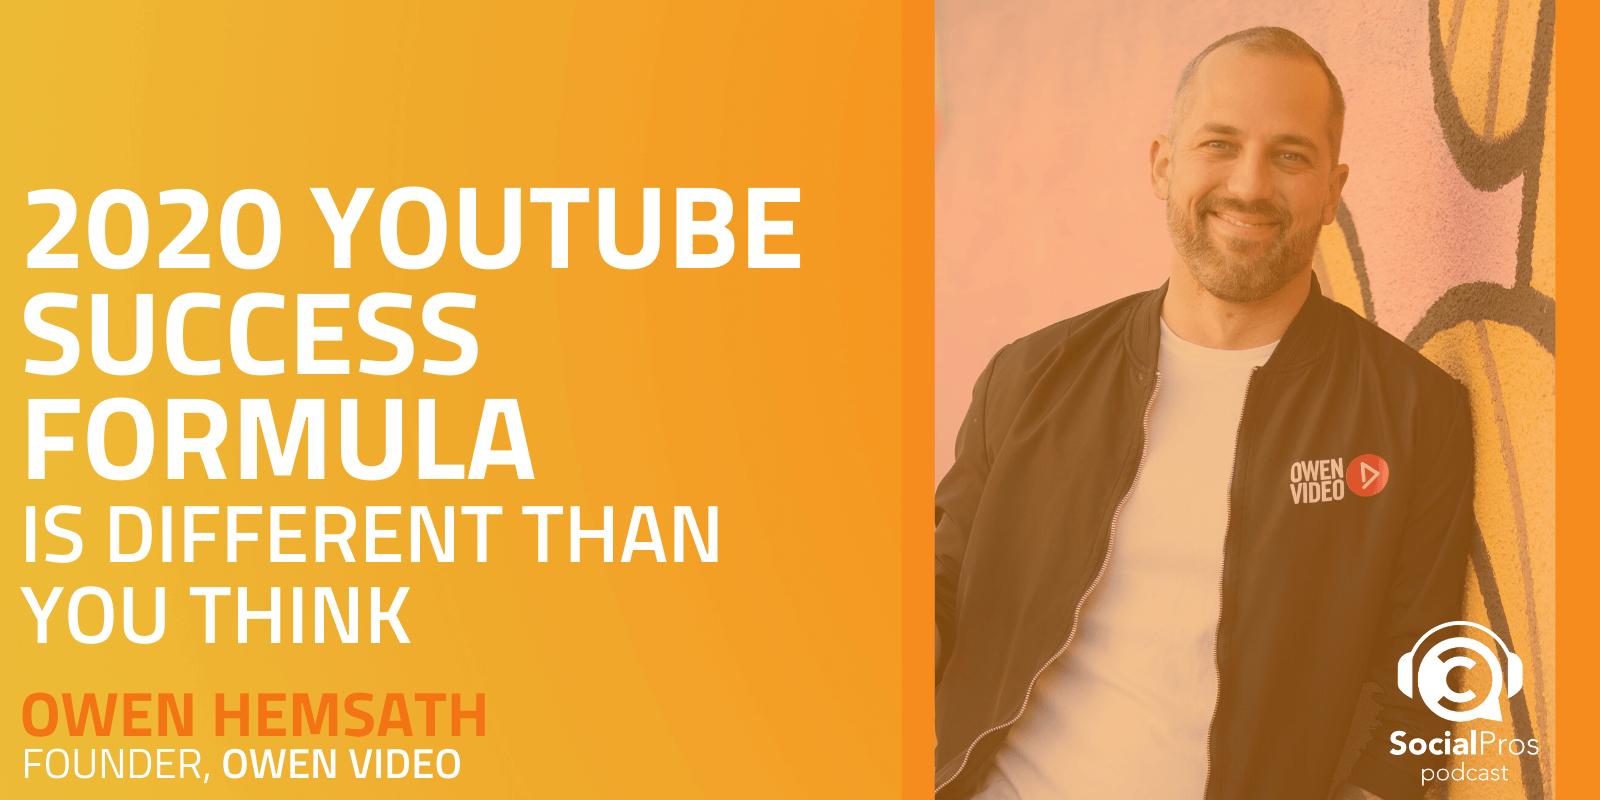 2020 Youtube Success Formula is Different Than You Think